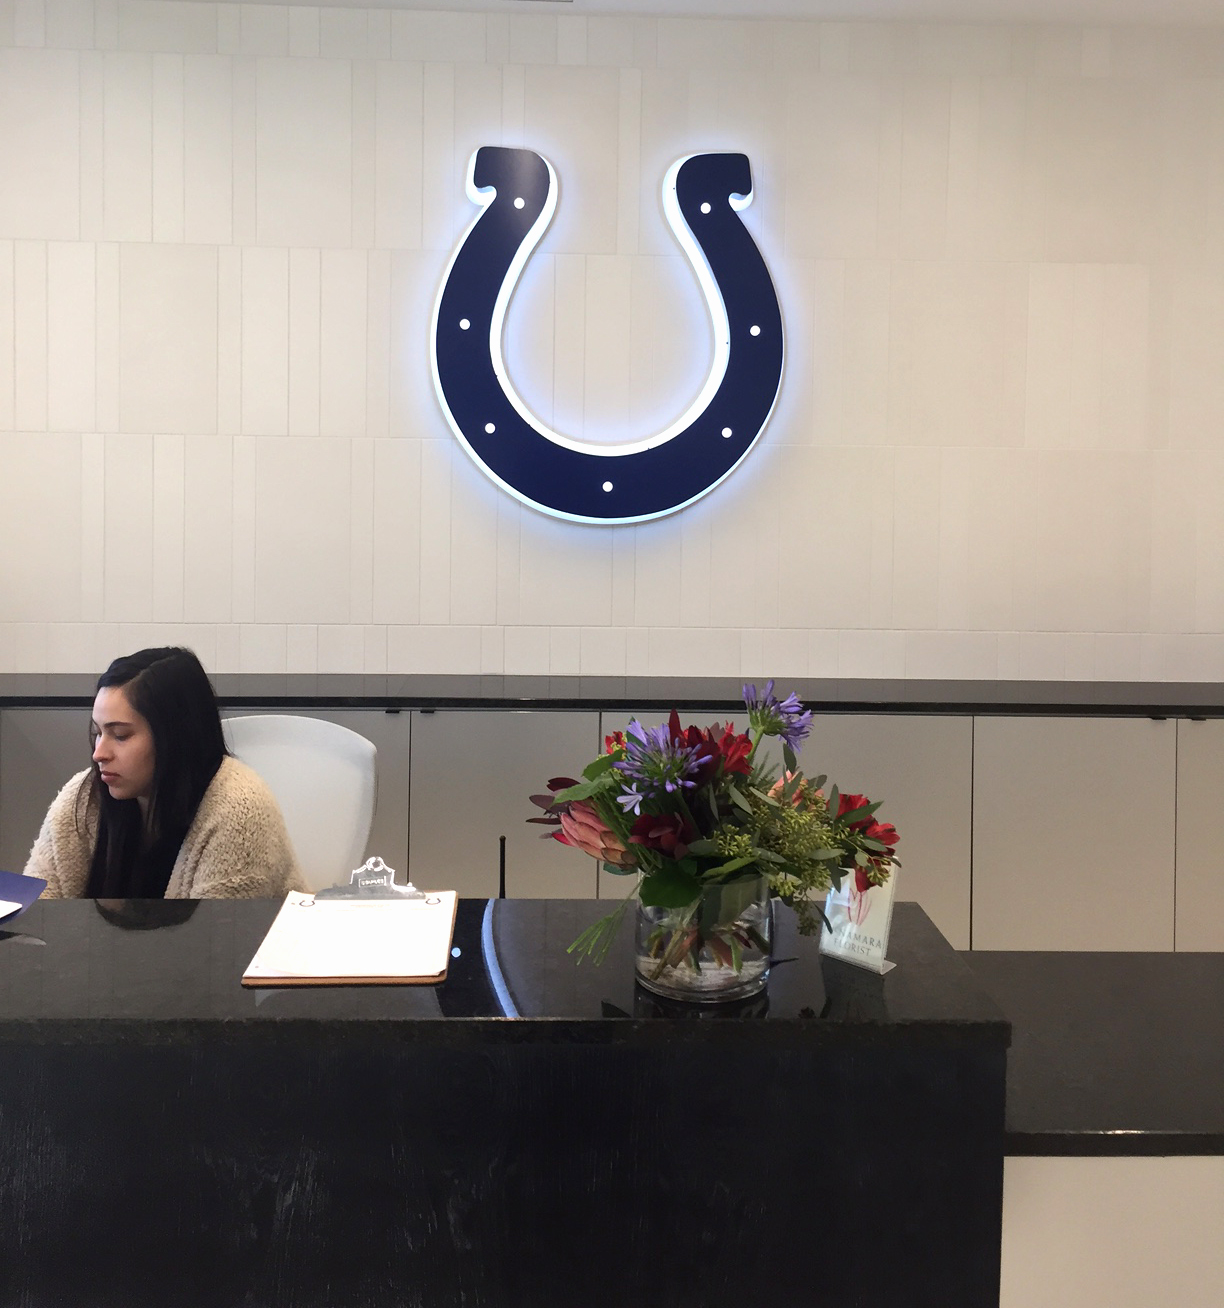 Huston brings illuminated Colts horseshoe logo to life in new Colts complex lobby.